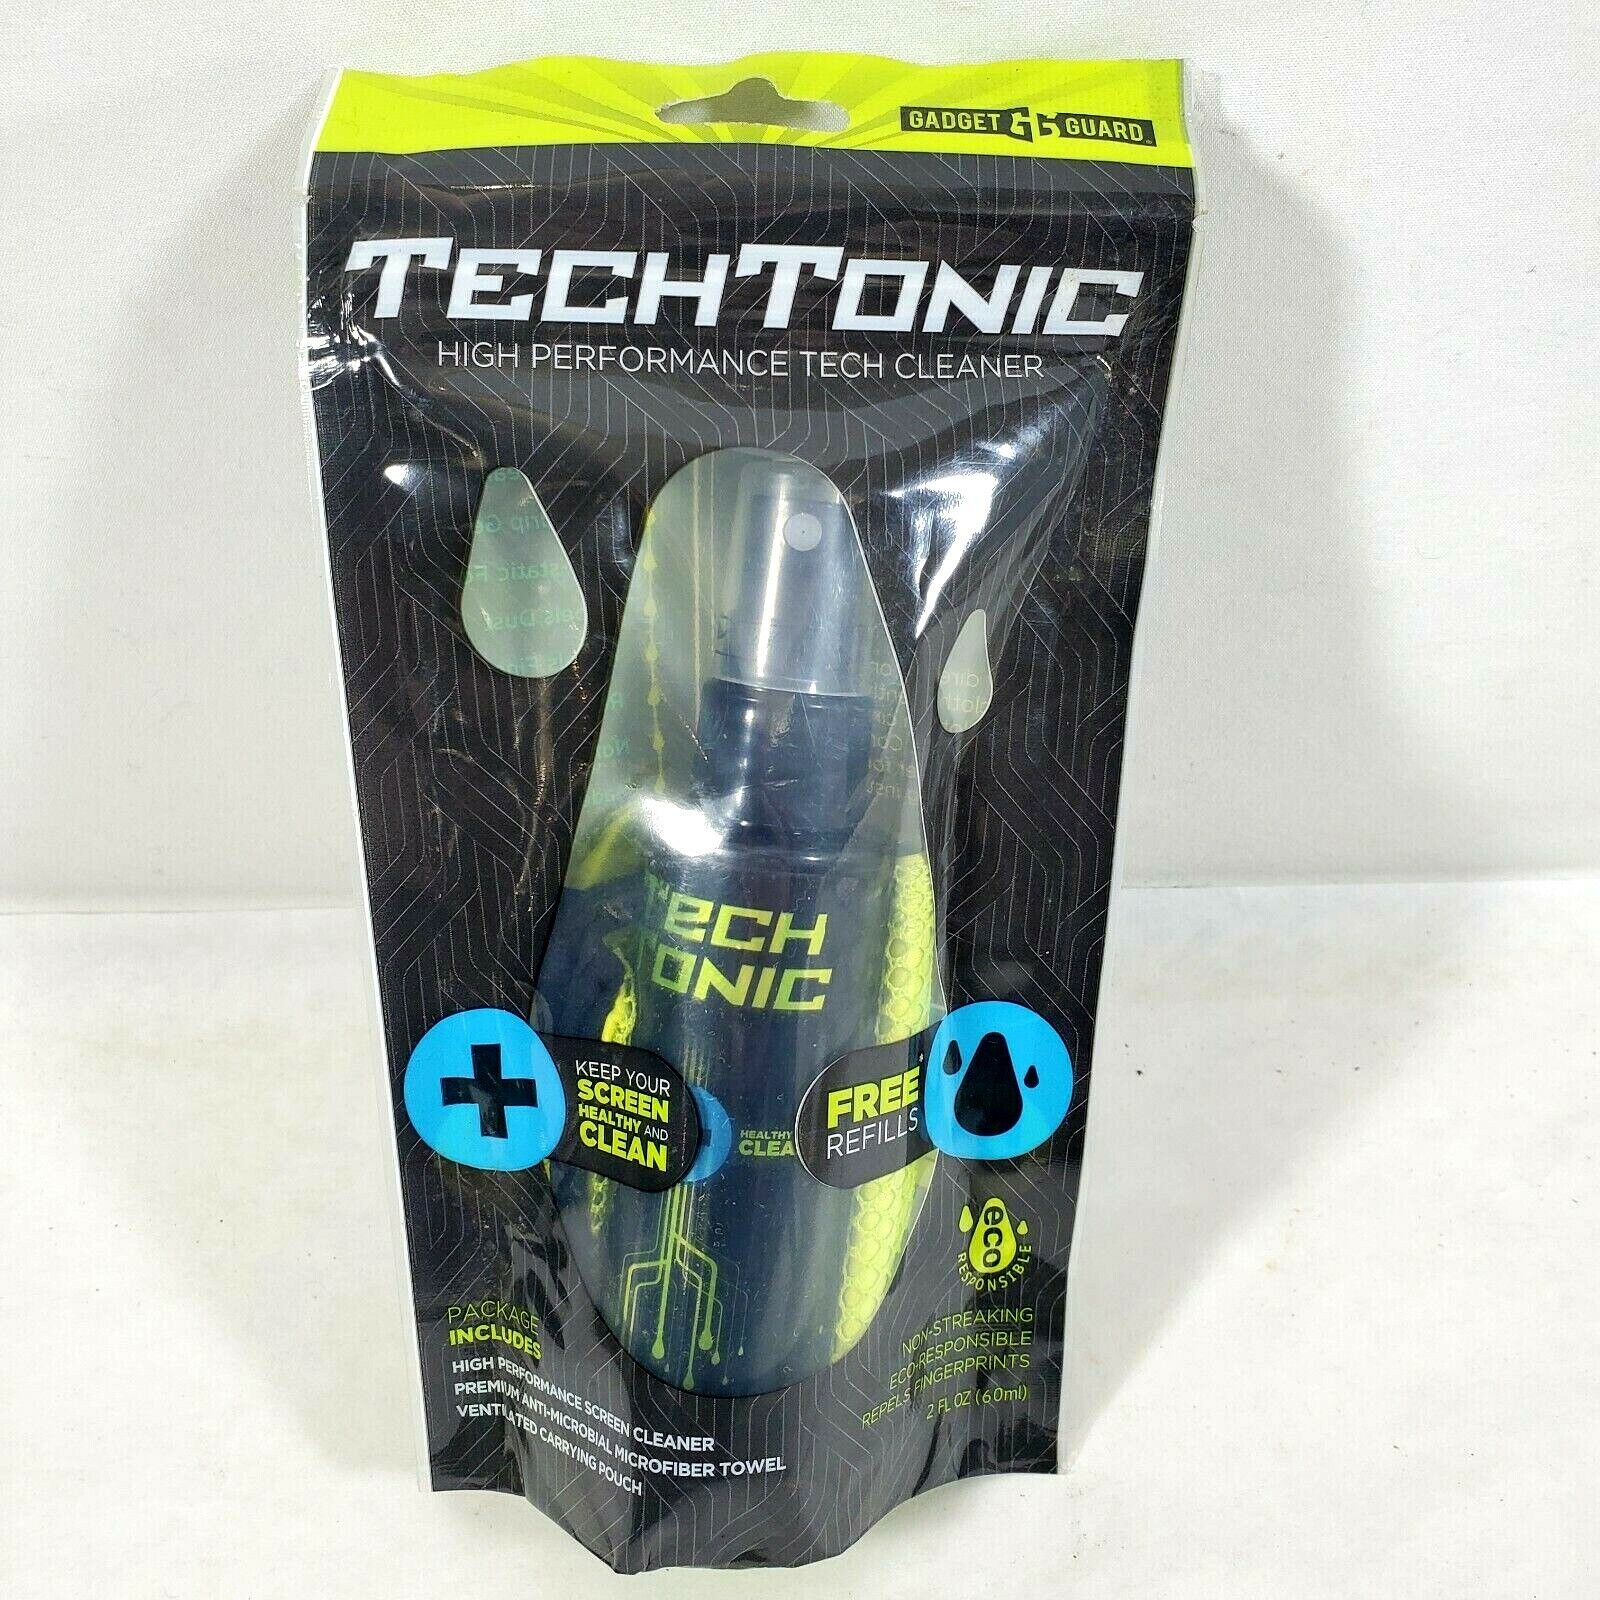 New TechTonic High Performance Tech Cleaner ~ Screen Cleaner, Towel, Pouch